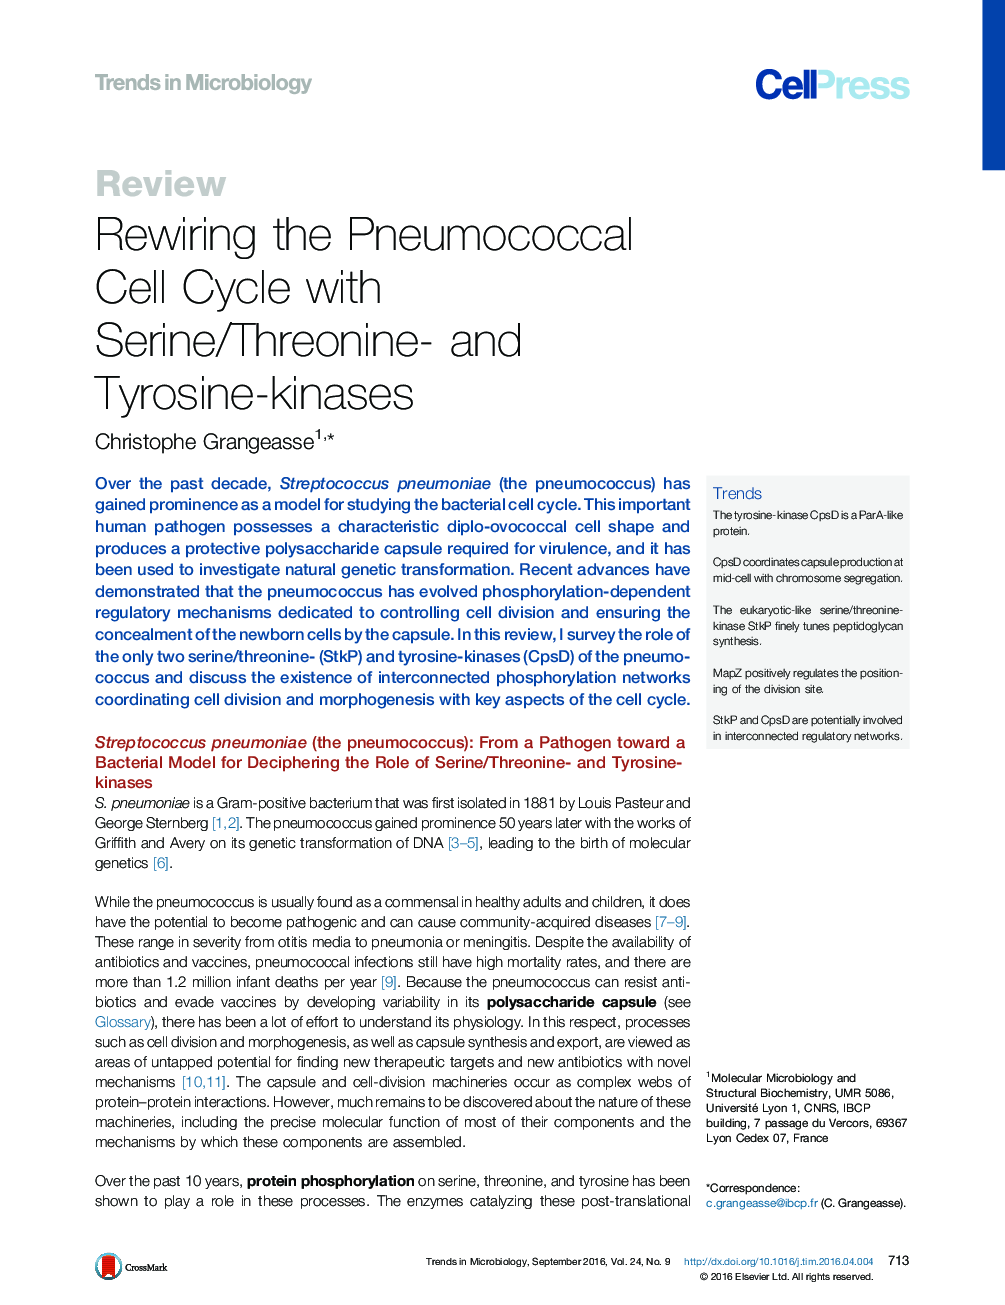 Rewiring the Pneumococcal Cell Cycle with Serine/Threonine- and Tyrosine-kinases